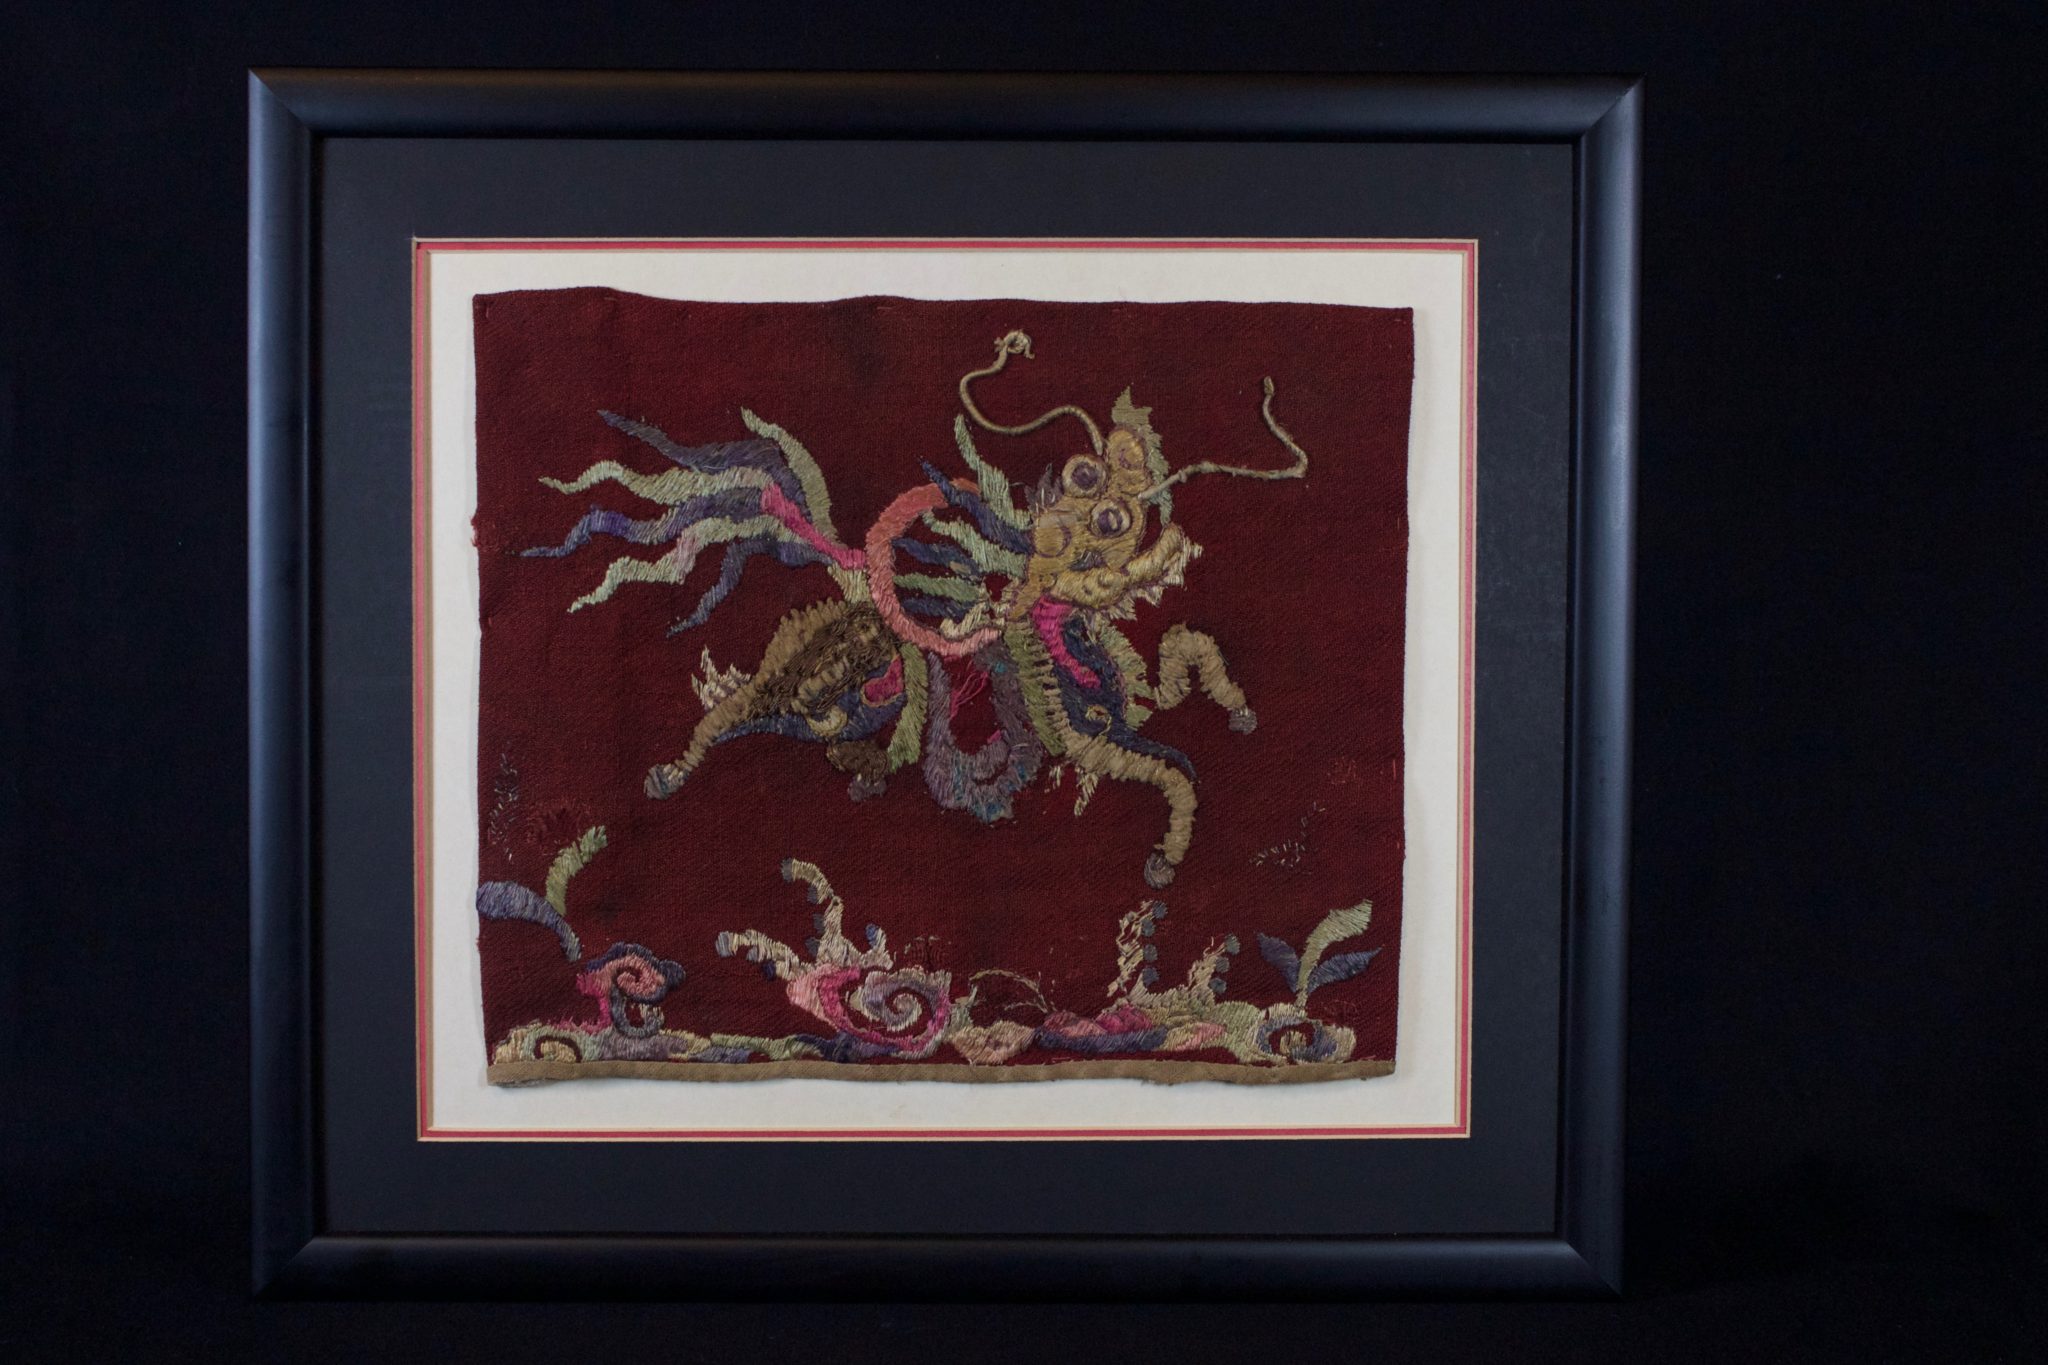 Sacred Unicorn (Kỳ lân) Panel (rare), Vietnam, Bac Ninh province, Mid 19th c, Red cotton textile with hand embroidered silk and precious-metal-wrapped thread. One of the four sacred animals, the unicorn symbolizes purity, happiness and wealth. If the unicorn appears, many good things will happen. It is often hung over the altar table in pagodas, temples or in homes of traditional families. Its strength and faithful nature are desirable for guarding temples and places of worship. Almost all of these pieces from this time period are portrayed in blue, cream and metallic color schemes. Because of its coloring, this panel is unusual and particularly desirable. 15 ½” x 17 ½” x ¾”, $590.